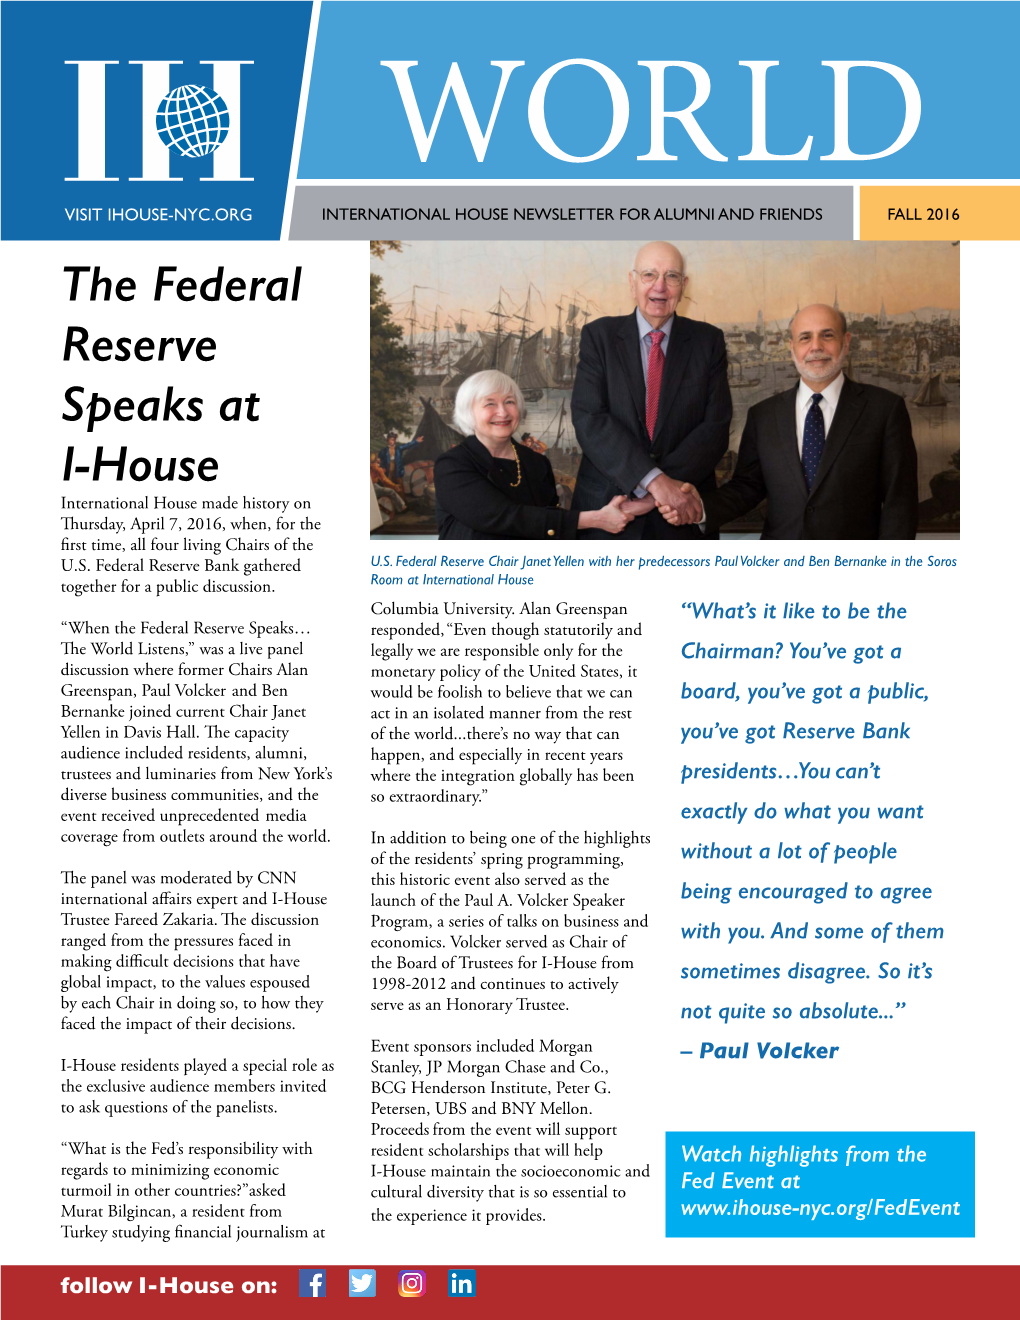 The Federal Reserve Speaks at I-House International House Made History on Thursday, April 7, 2016, When, for the First Time, All Four Living Chairs of the U.S